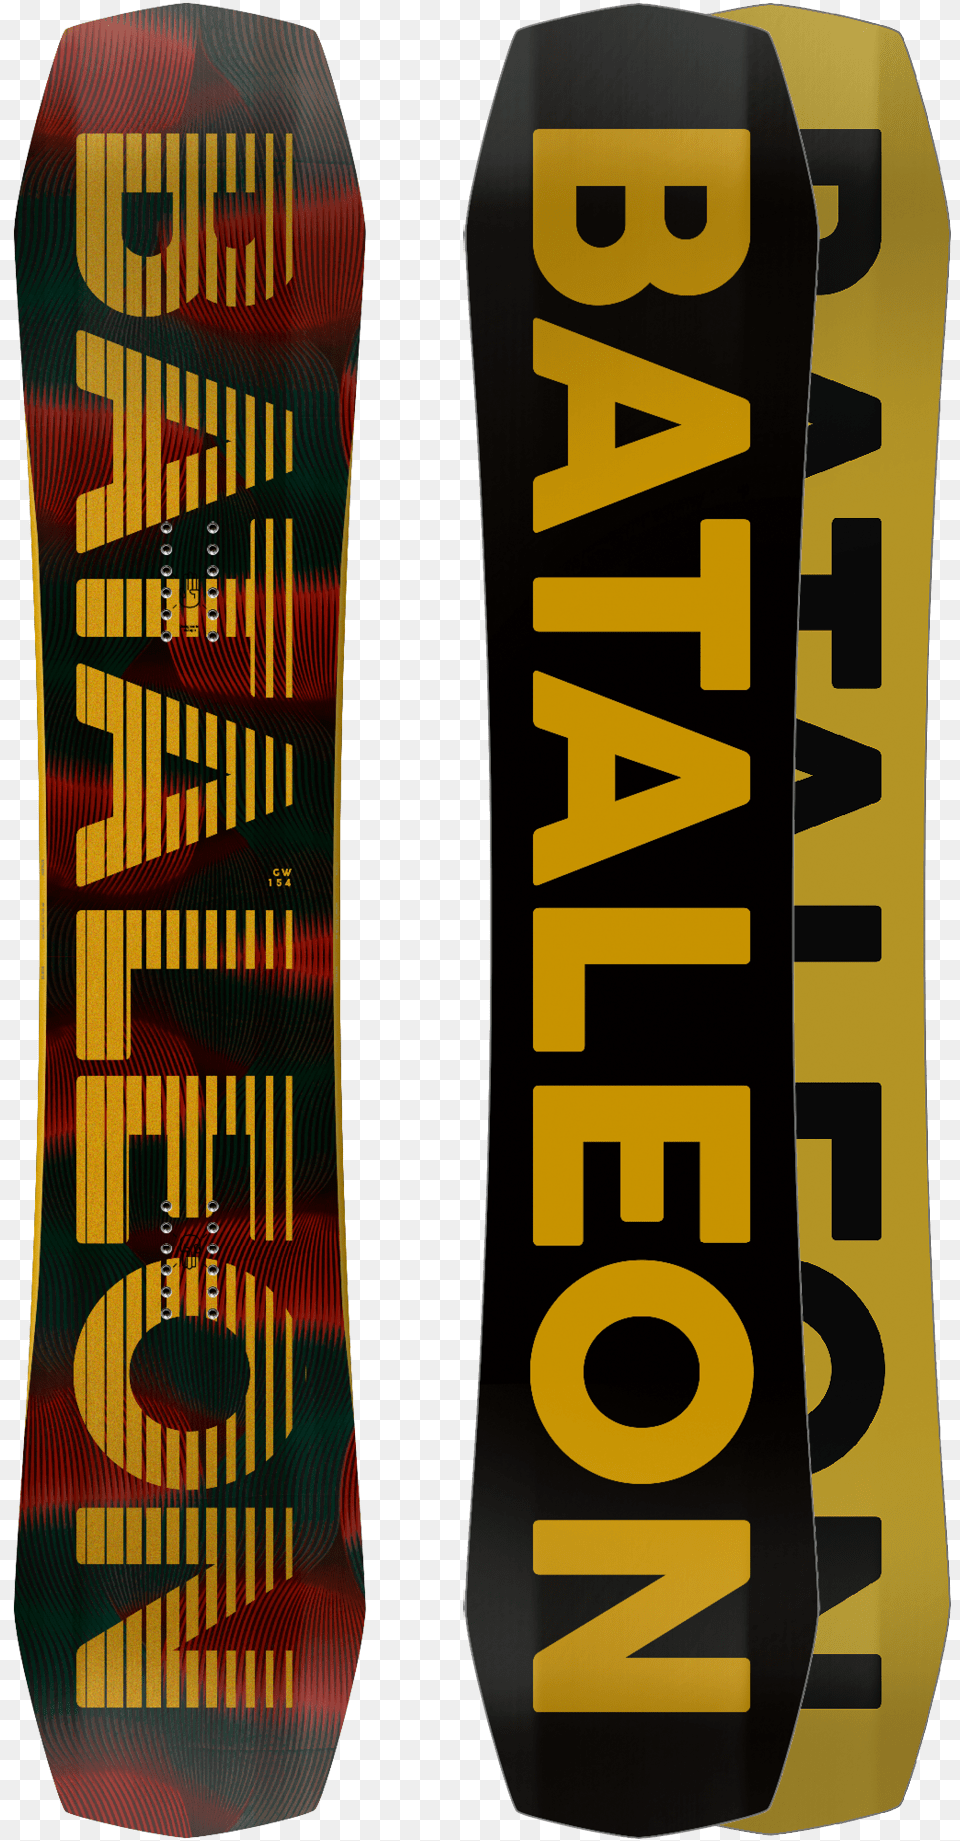 Skateboard Side View Free Transparent Png